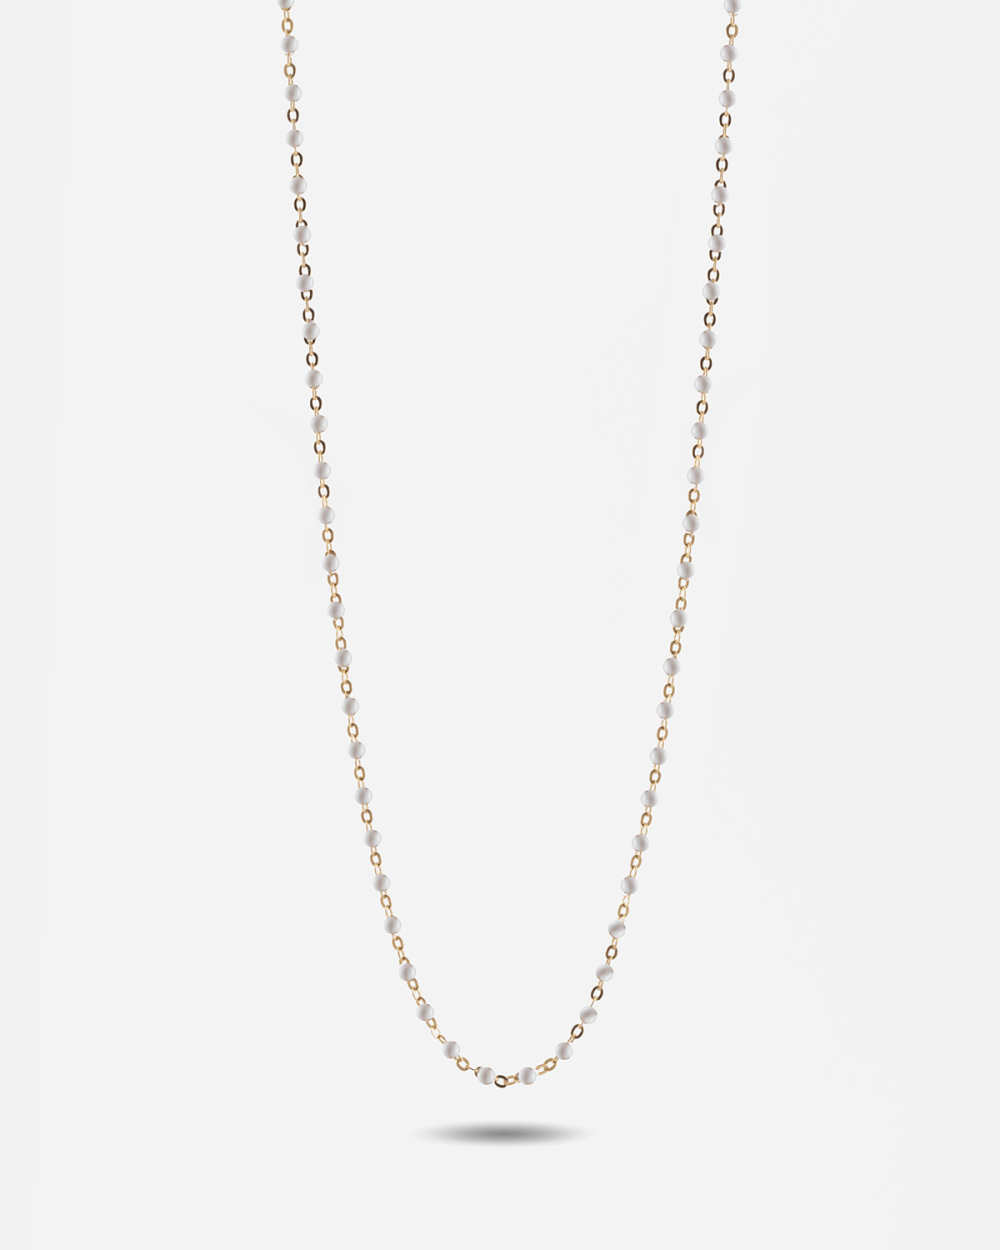 YELLOW GOLD NECKLACE WITH WHITE ENAMEL